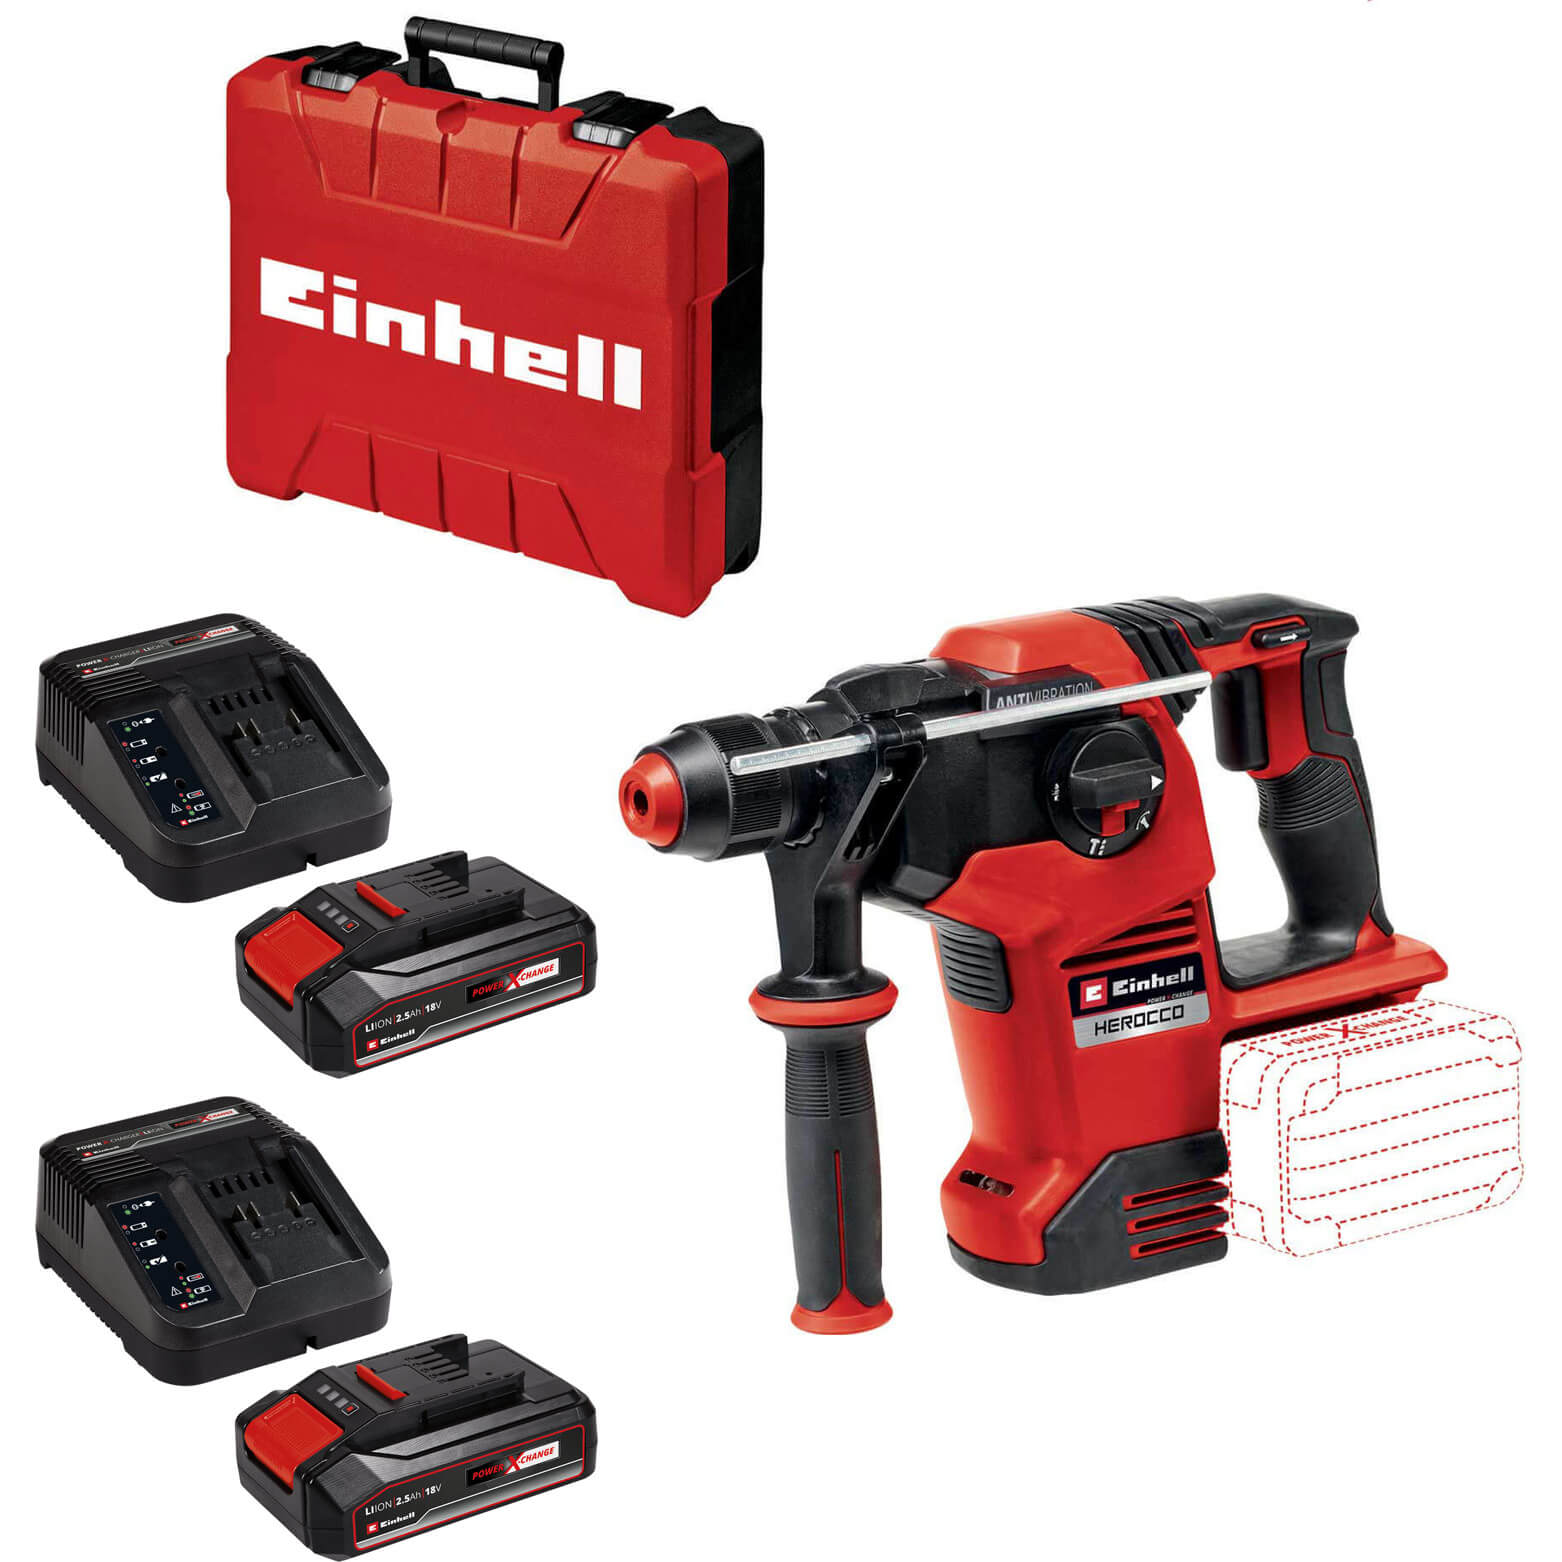 Einhell HEROCCO 36/28 36v Cordless Brushless SDS Plus Rotary Hammer Drill 2 x 2.5ah Li-ion Charger Case